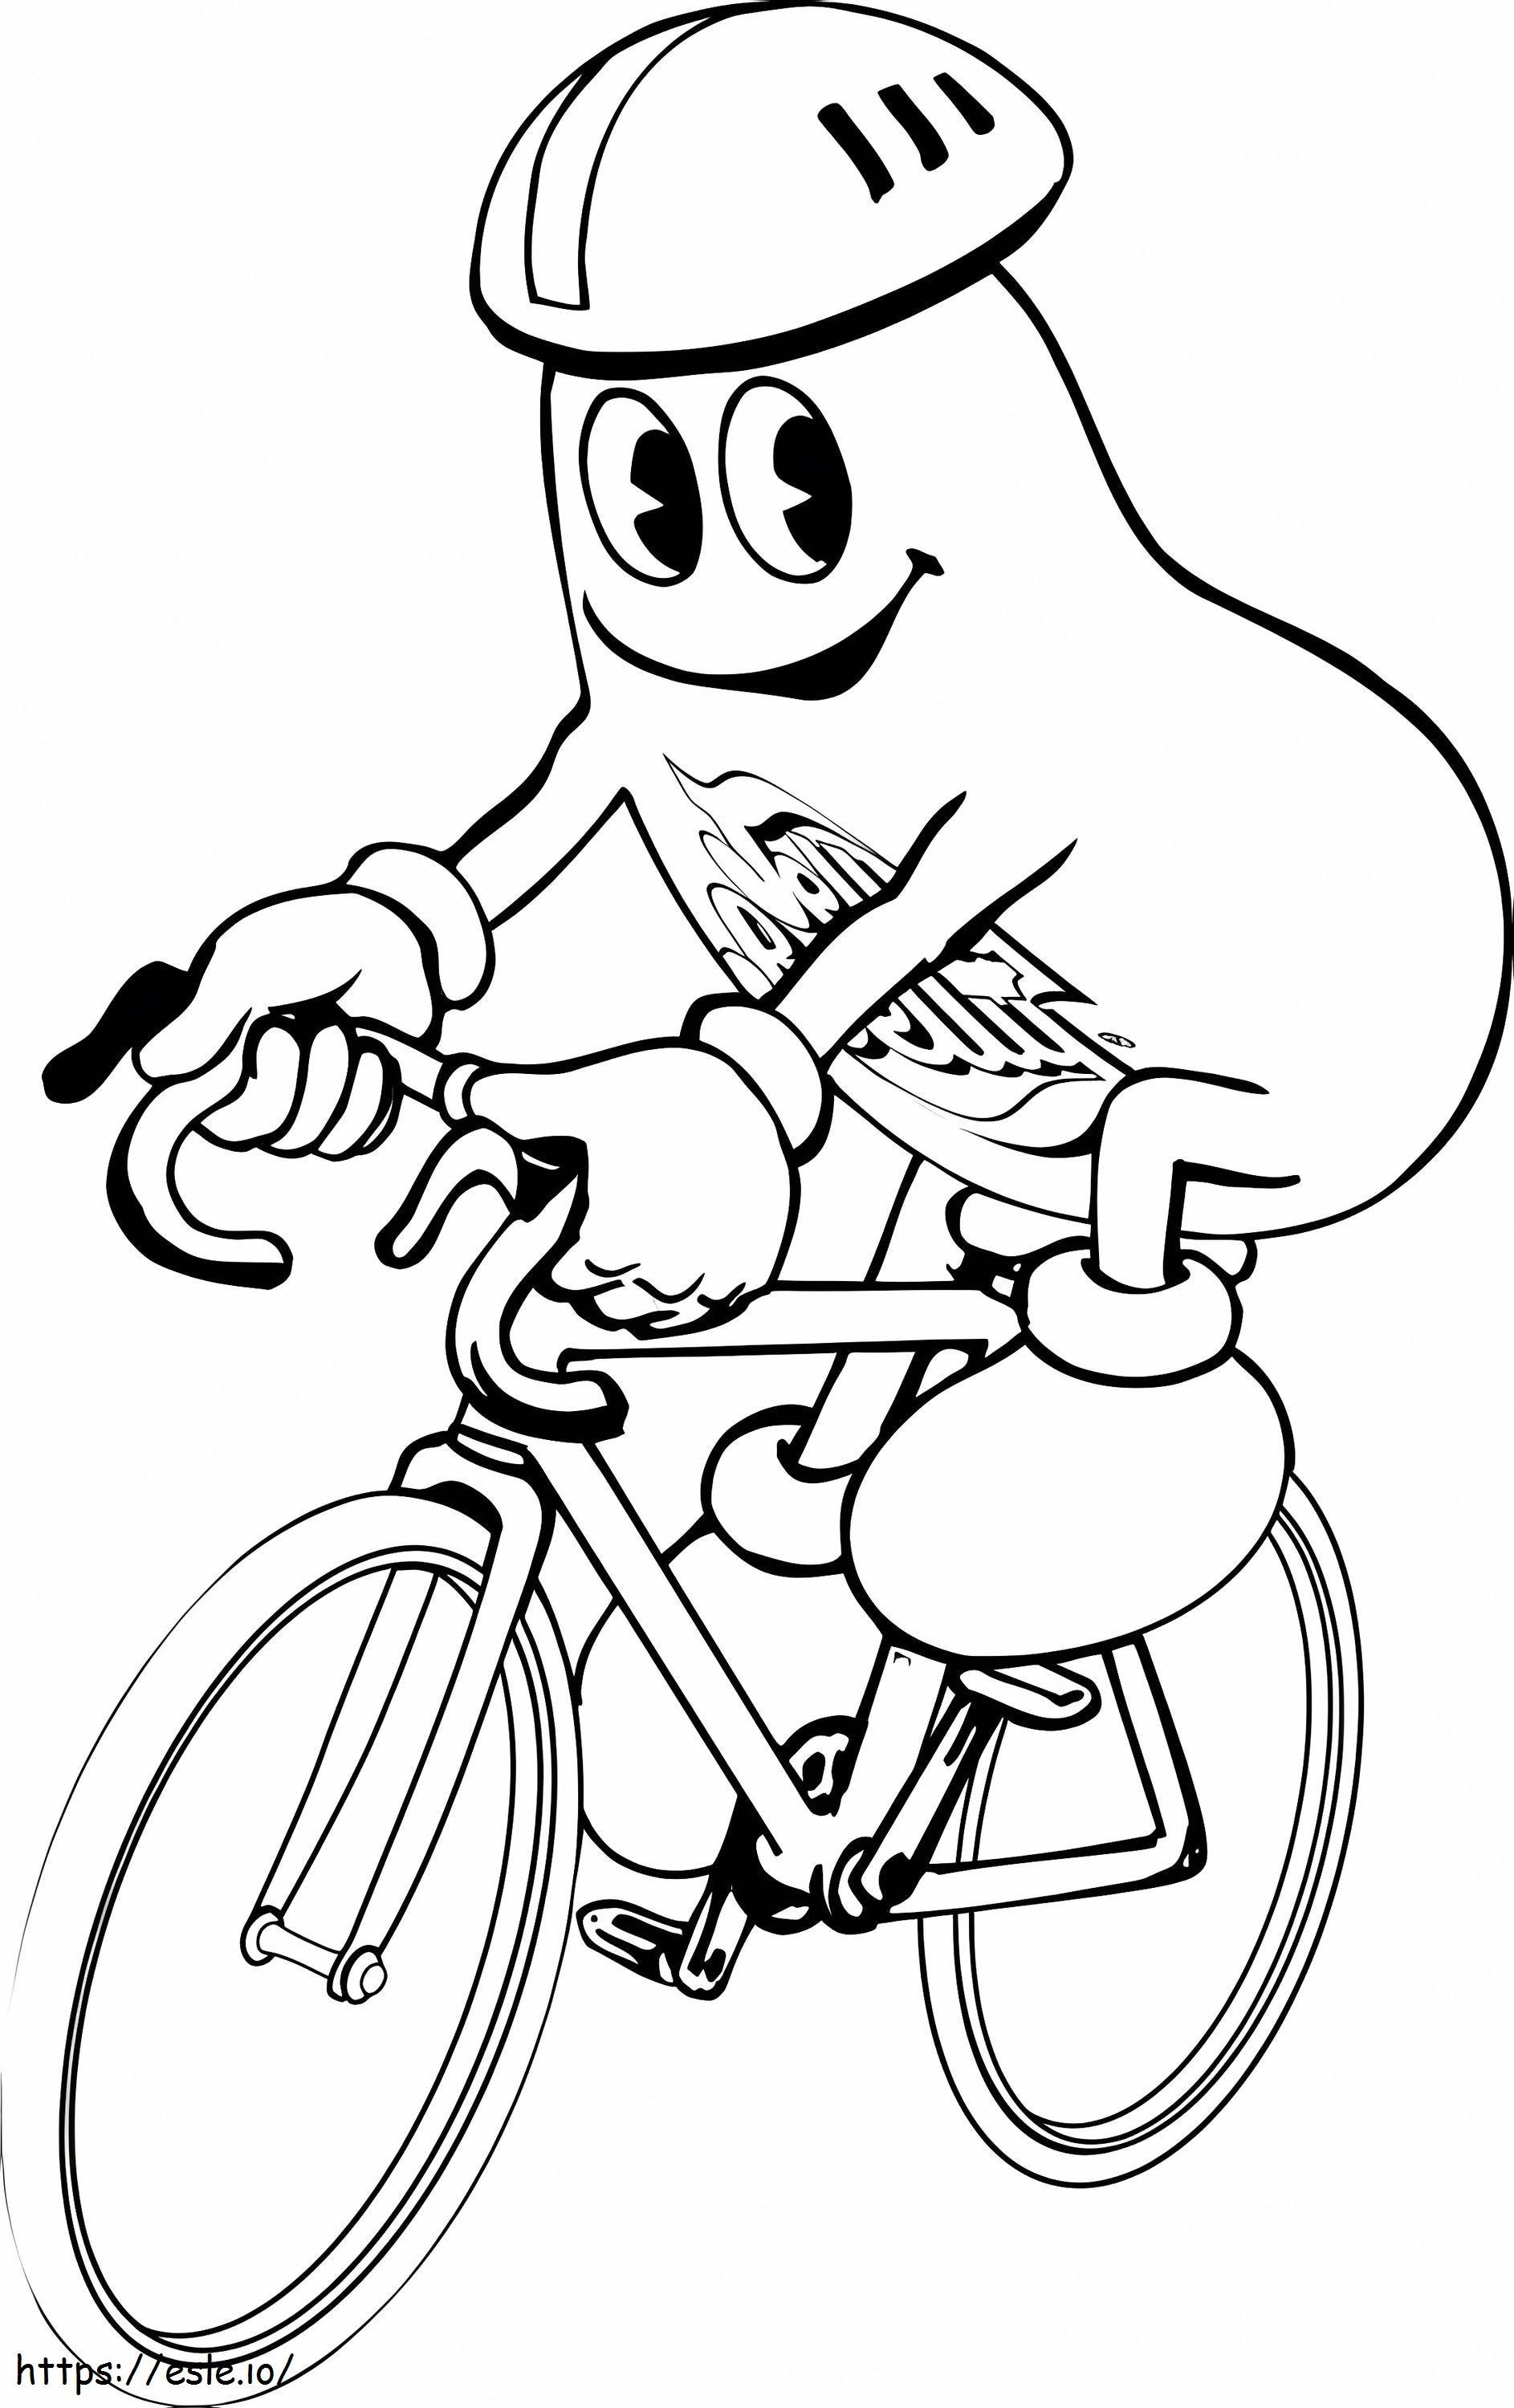 Beans Riding Bike coloring page